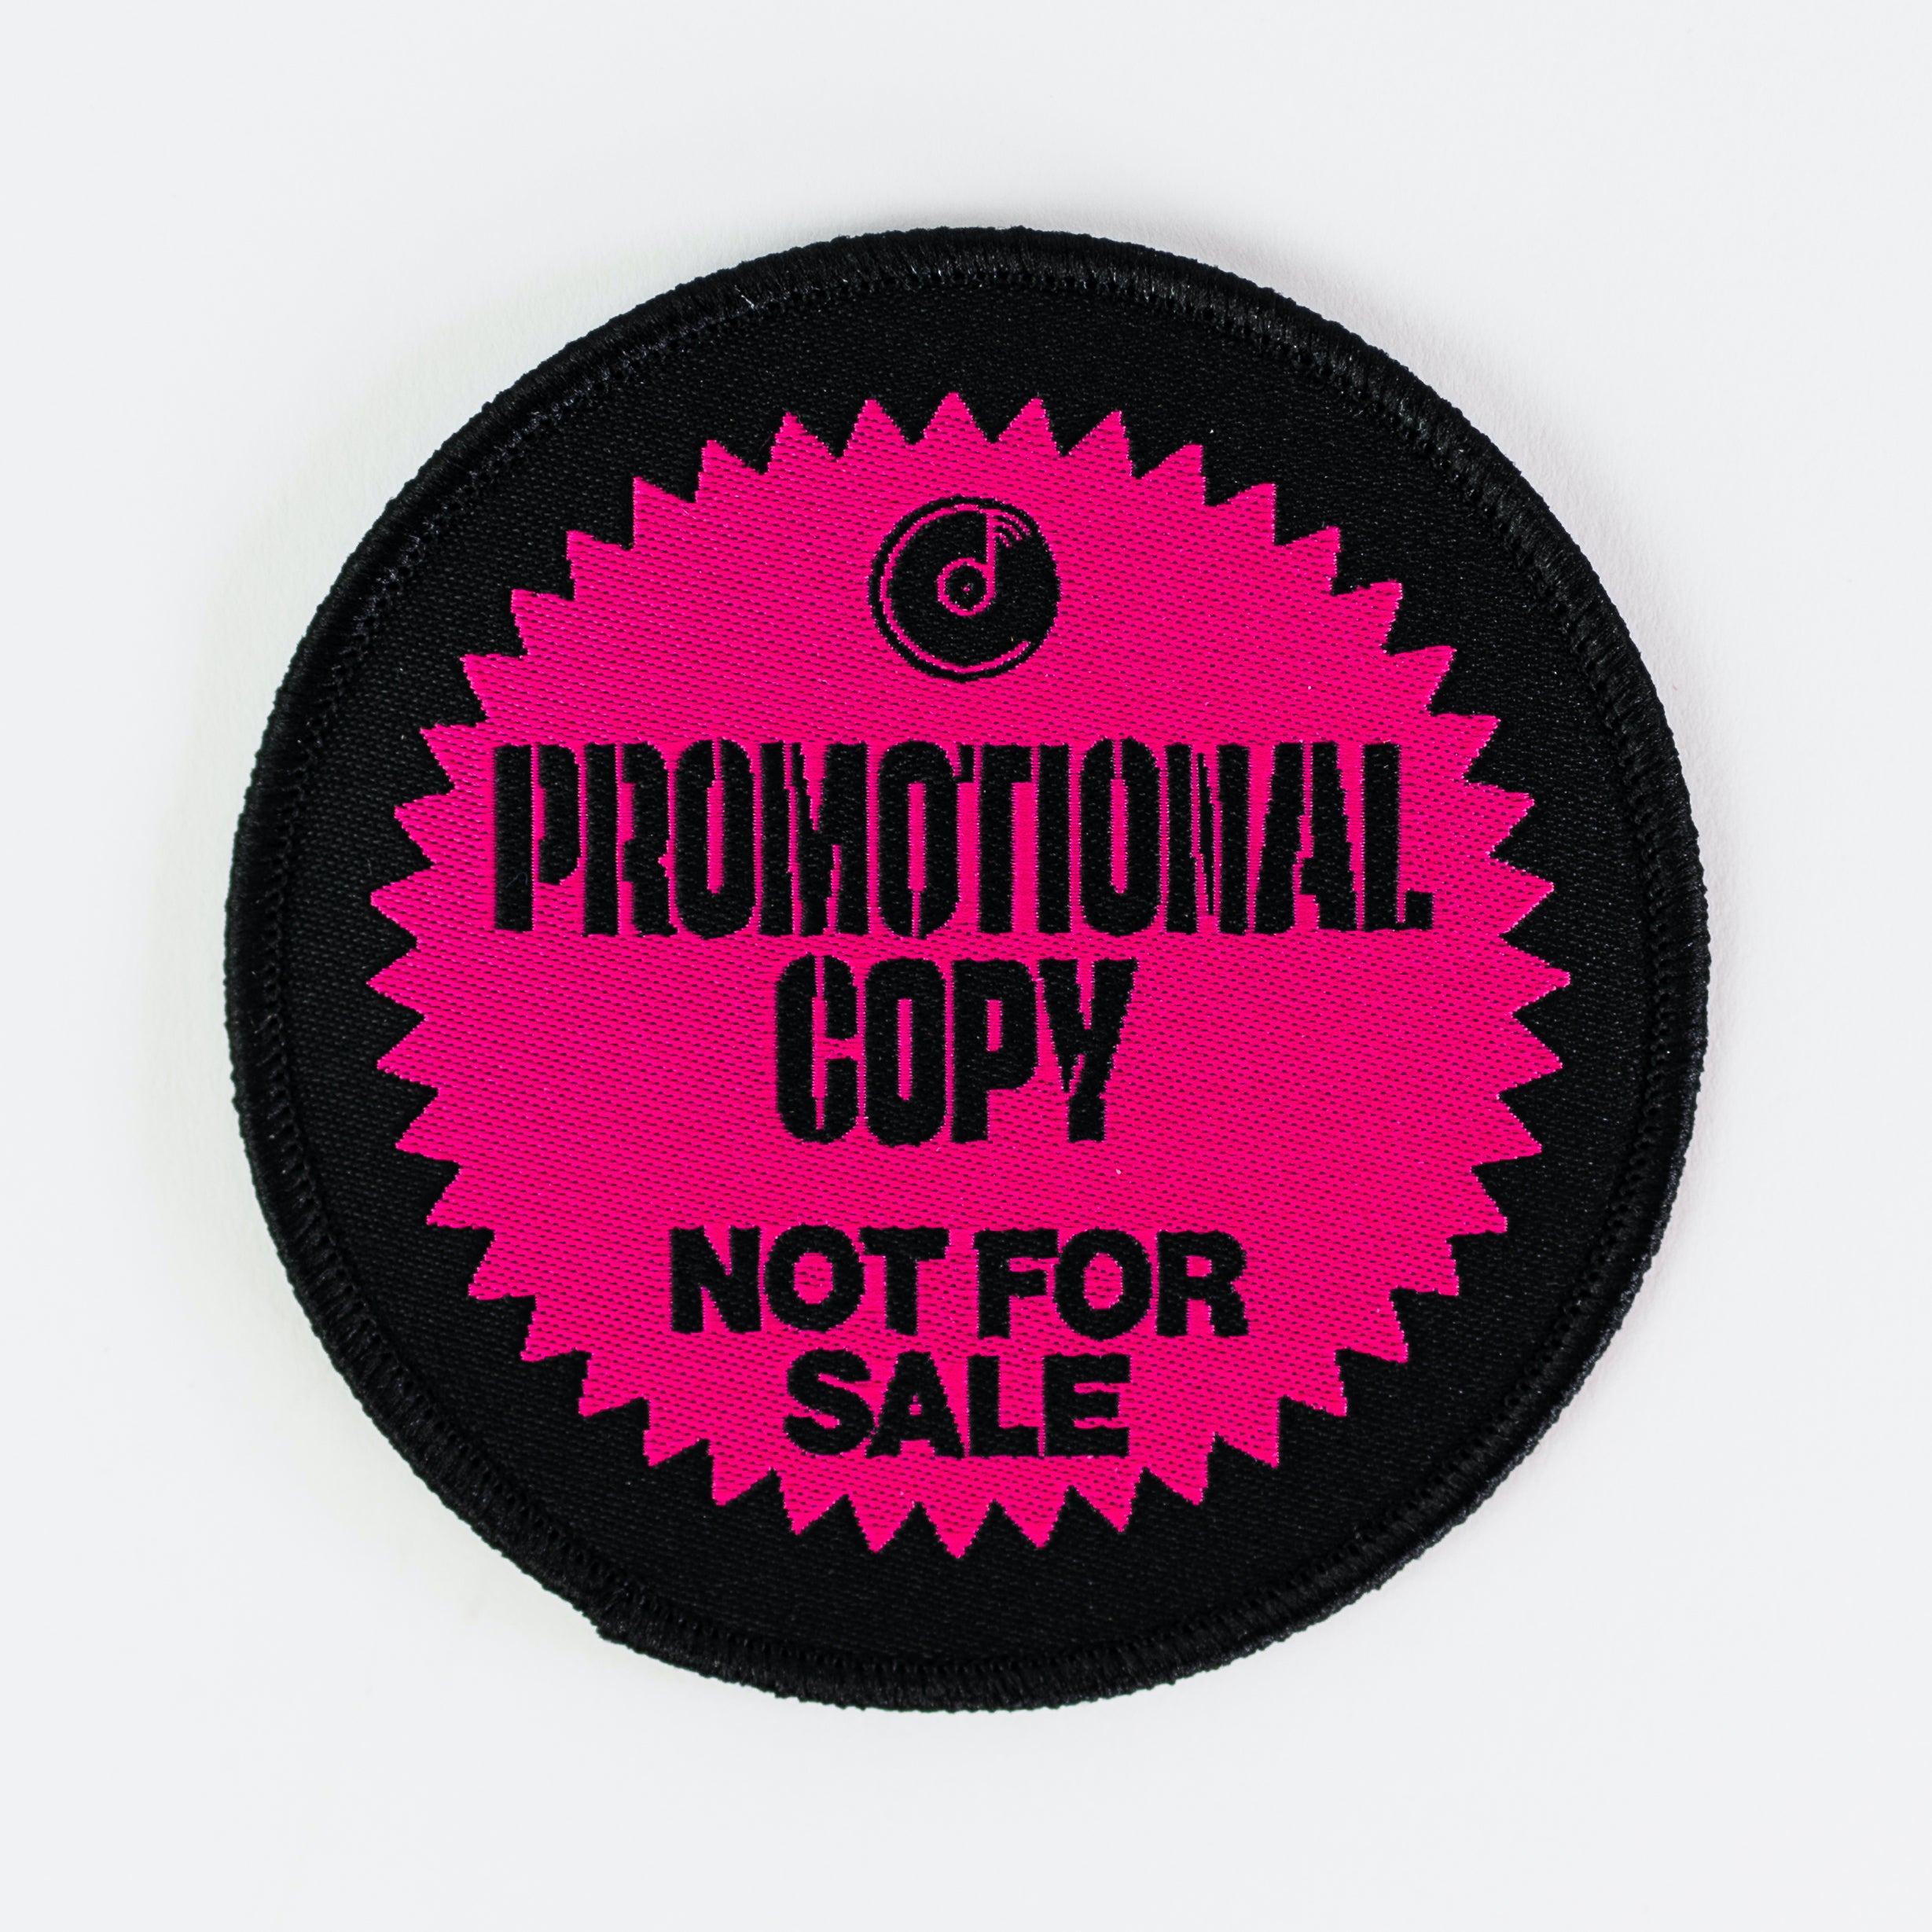 Promotional Copy Not For Sale - Patch